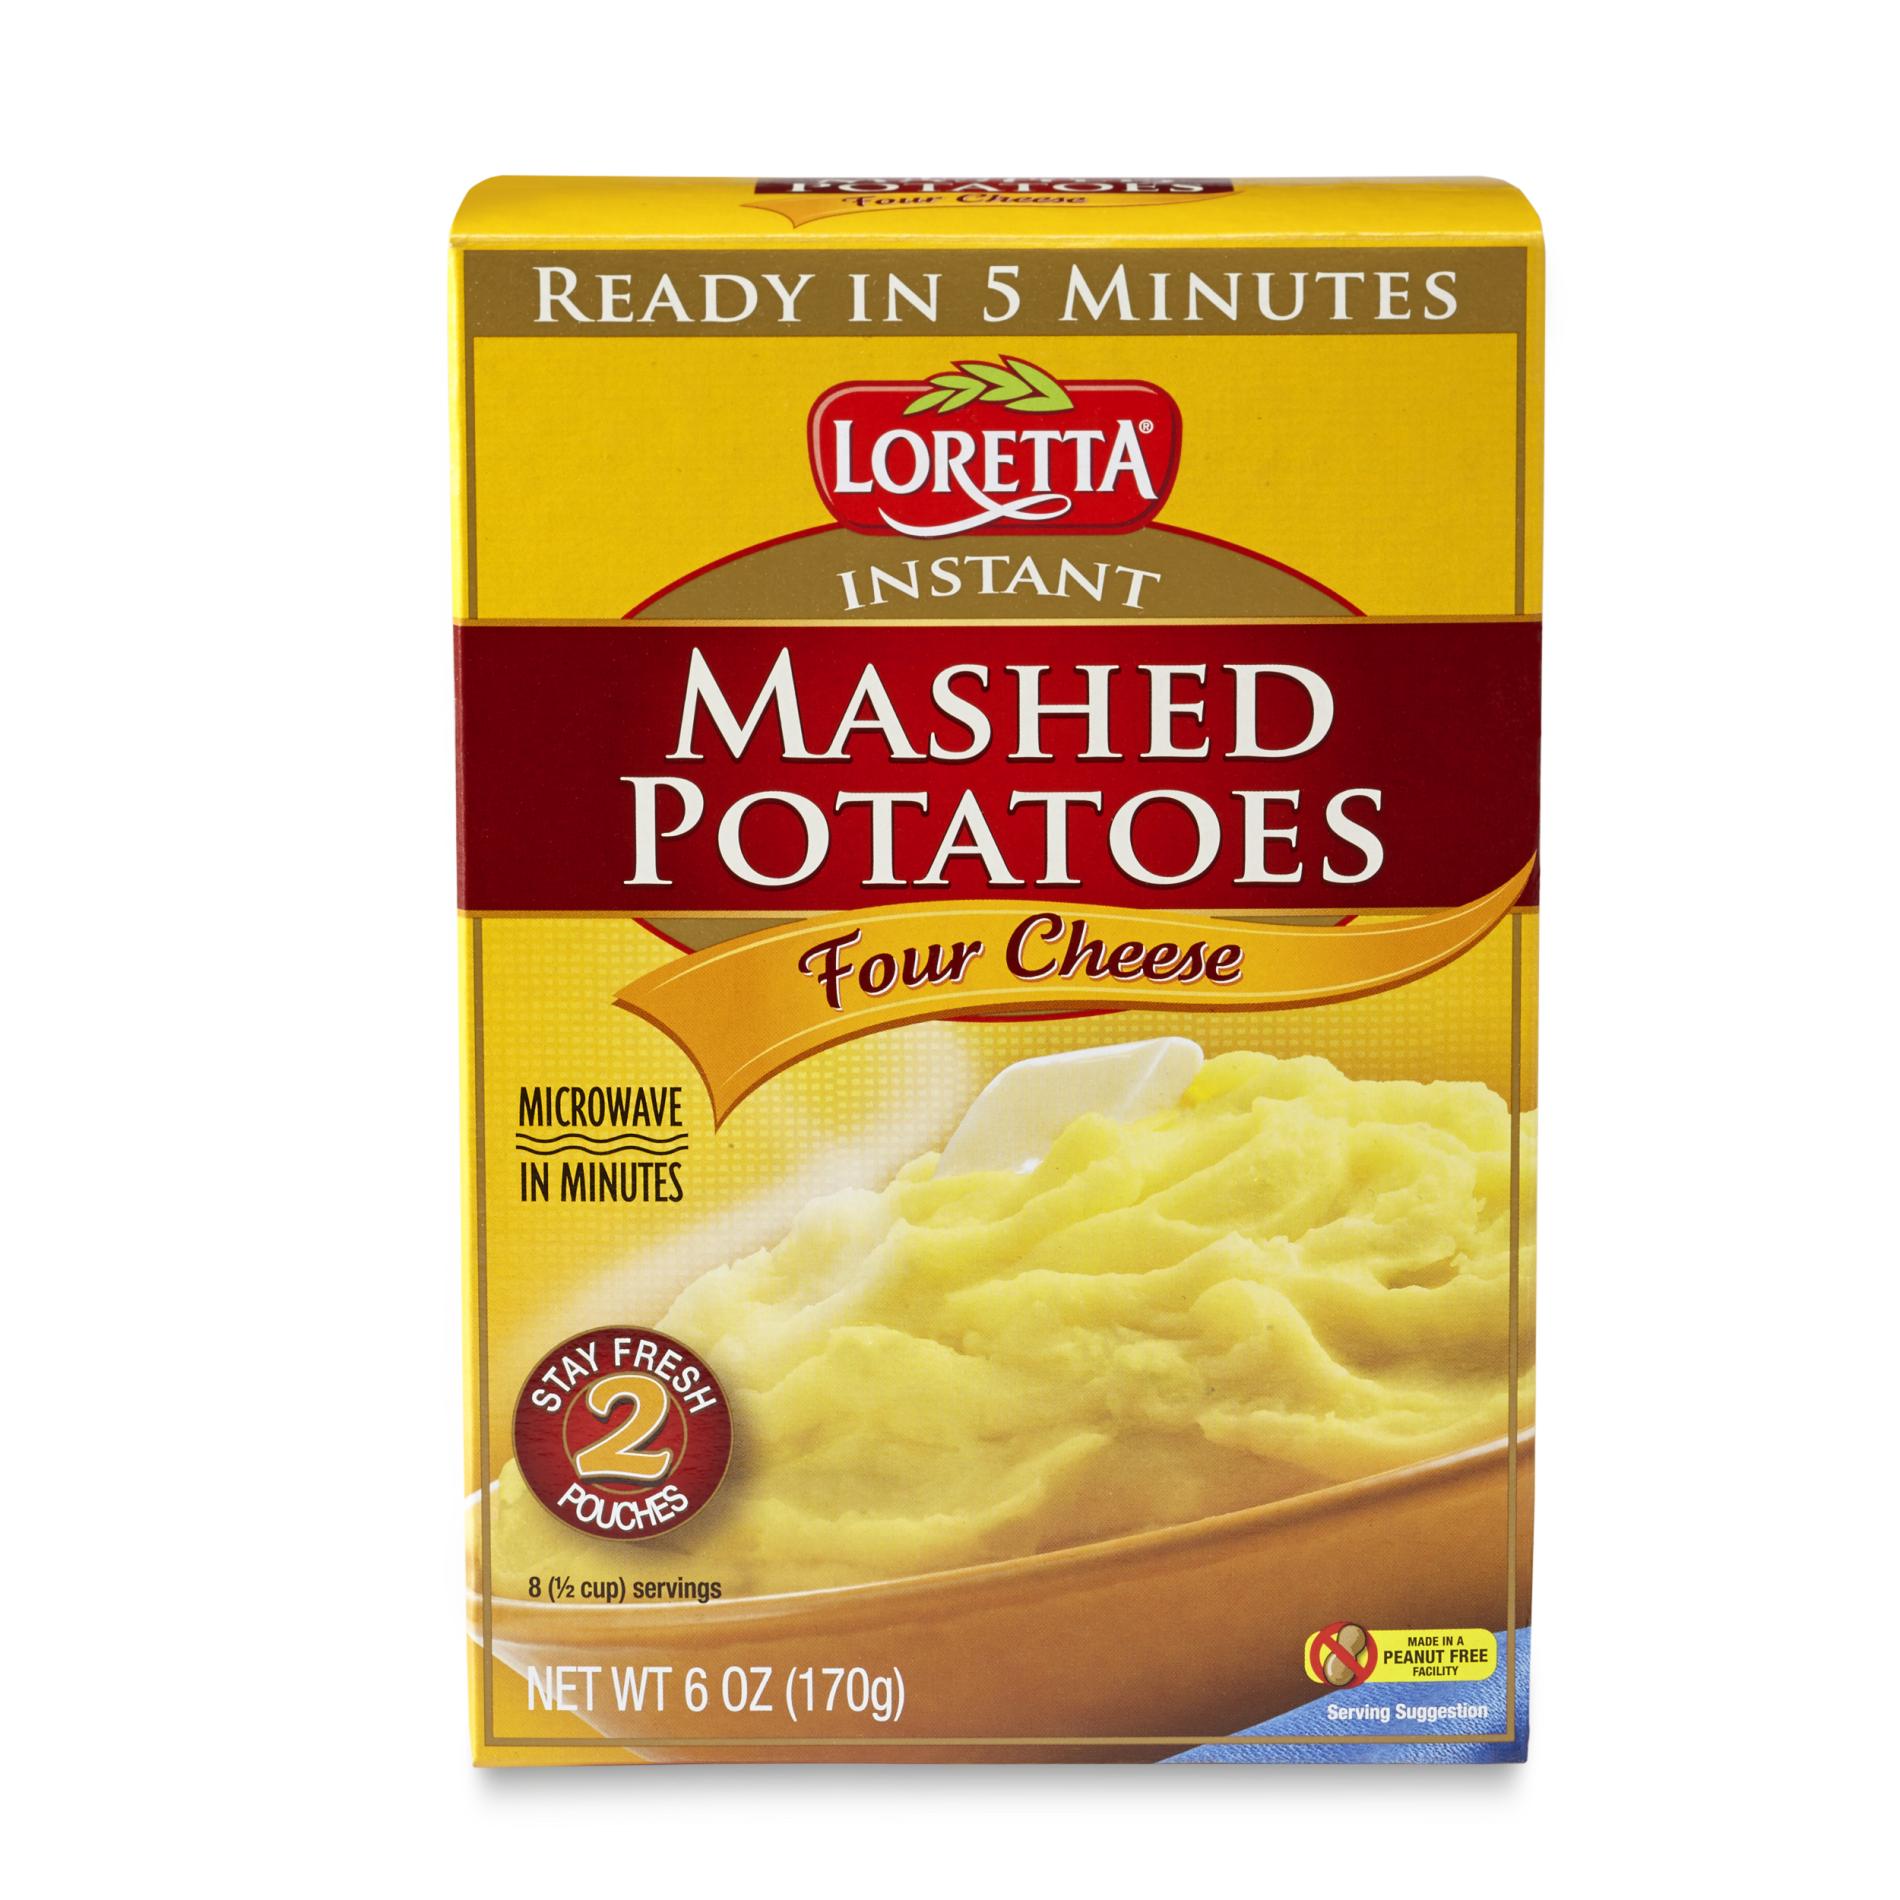 Loretta Instant Mashed Potatoes Four Cheese